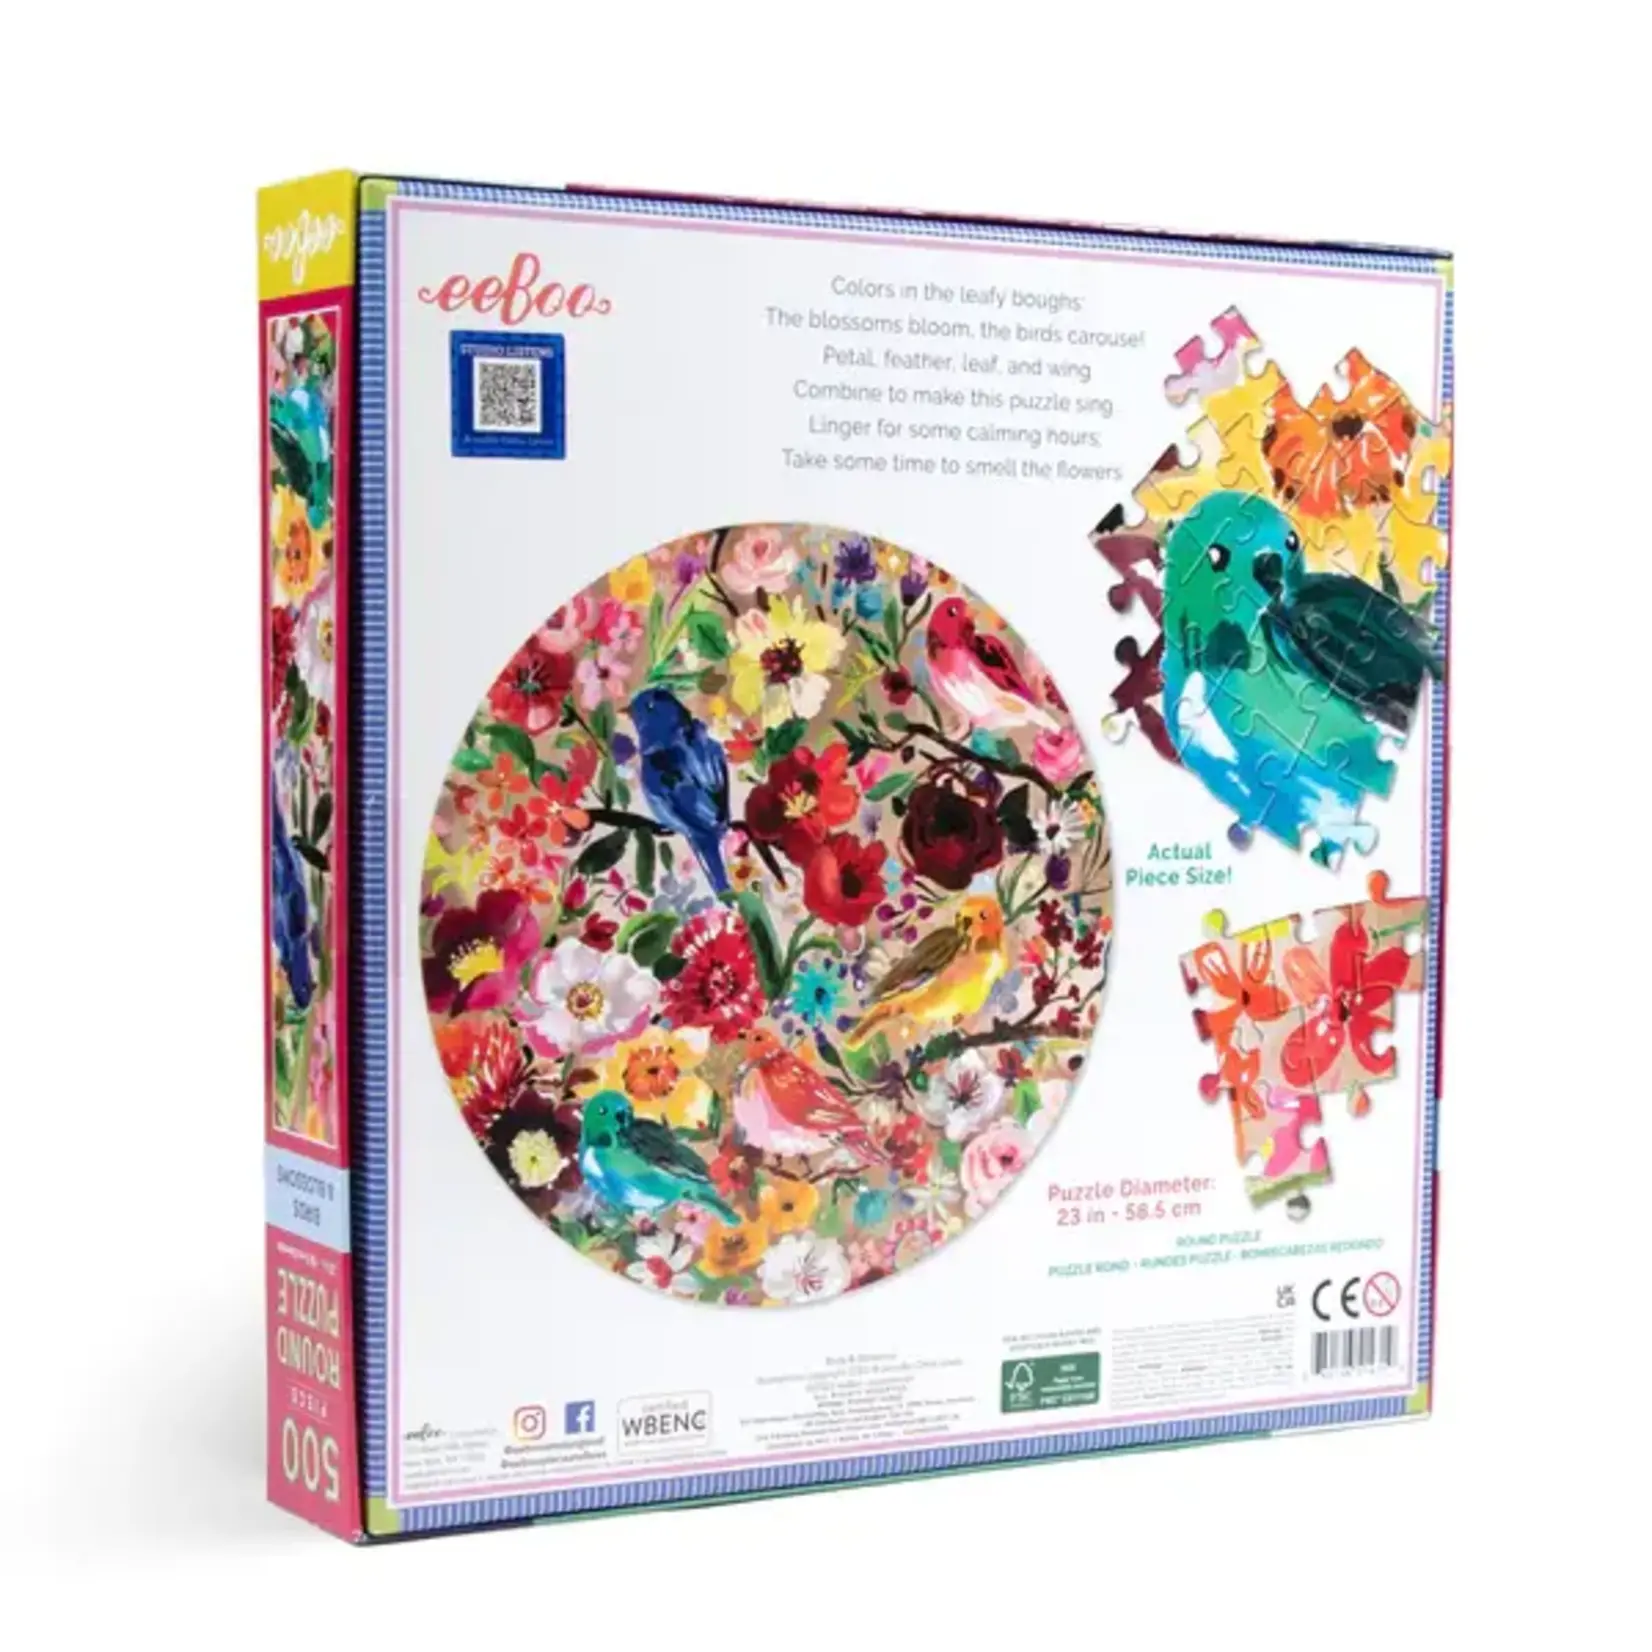 Birds and Blossoms 500 Piece Round Puzzle